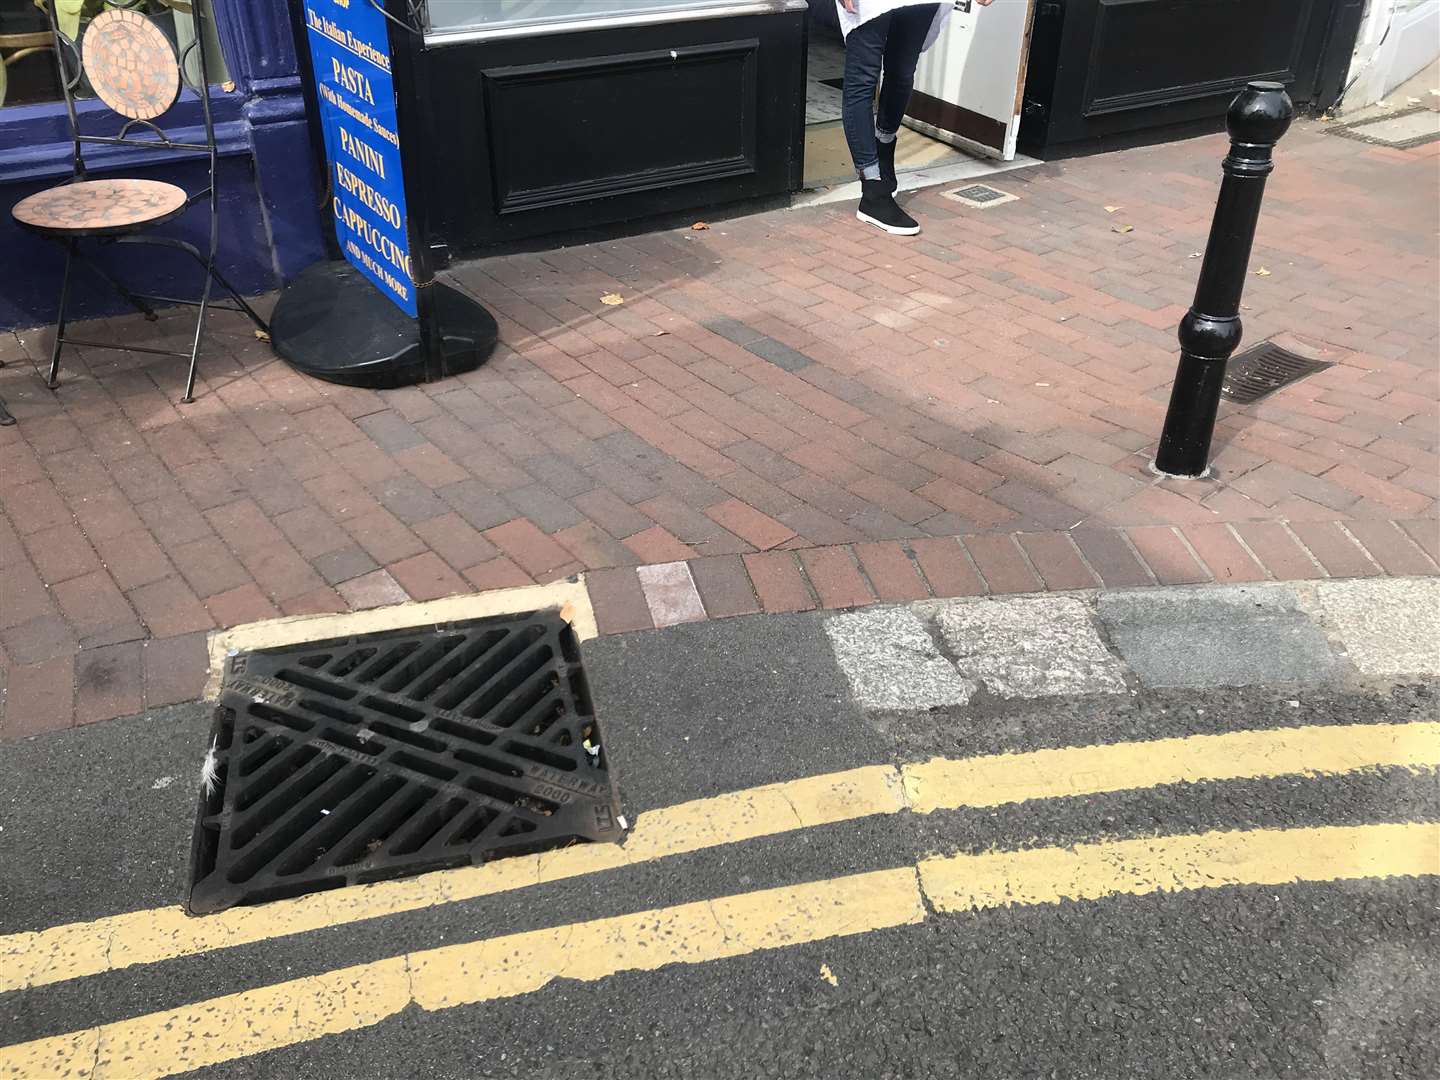 The drains in South Street